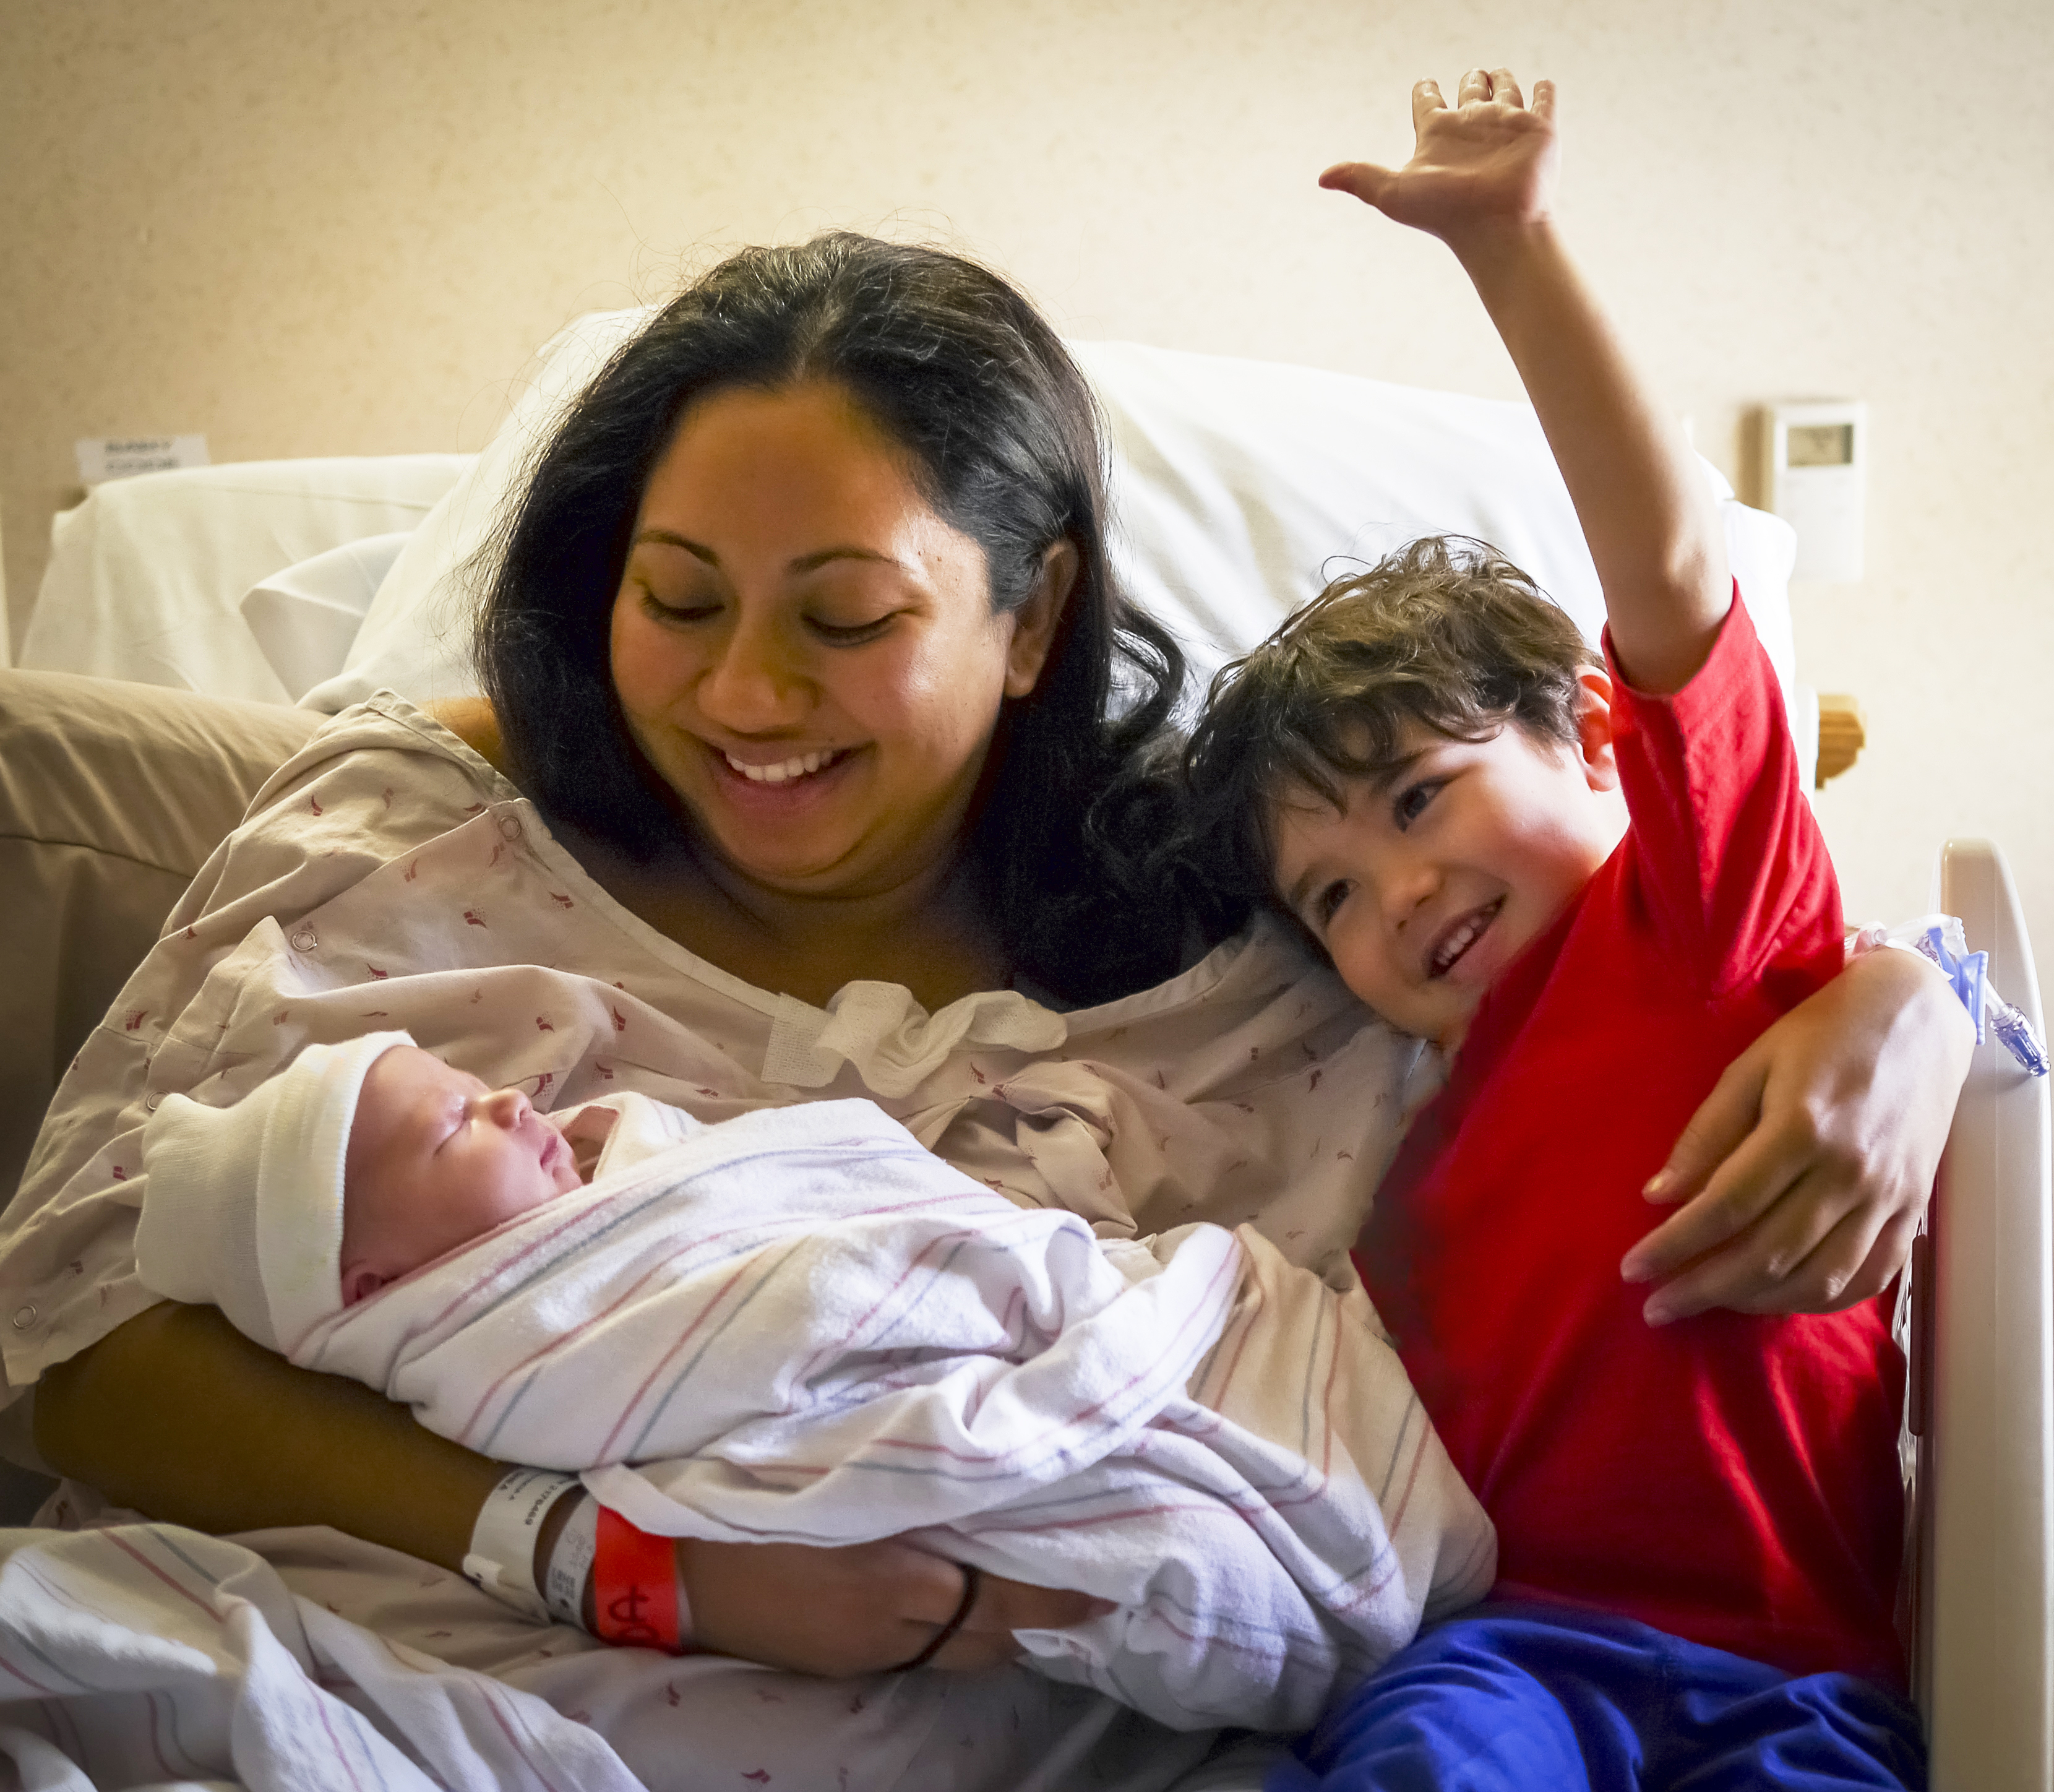 Mother in hospital bed with three year old son meeting his hours old brother for the very first time. These are the photographer's daughter-in-law and two grandsons. I removed the spiderman design from the 3 year old's shirt and the words on the baby's stocking cap.